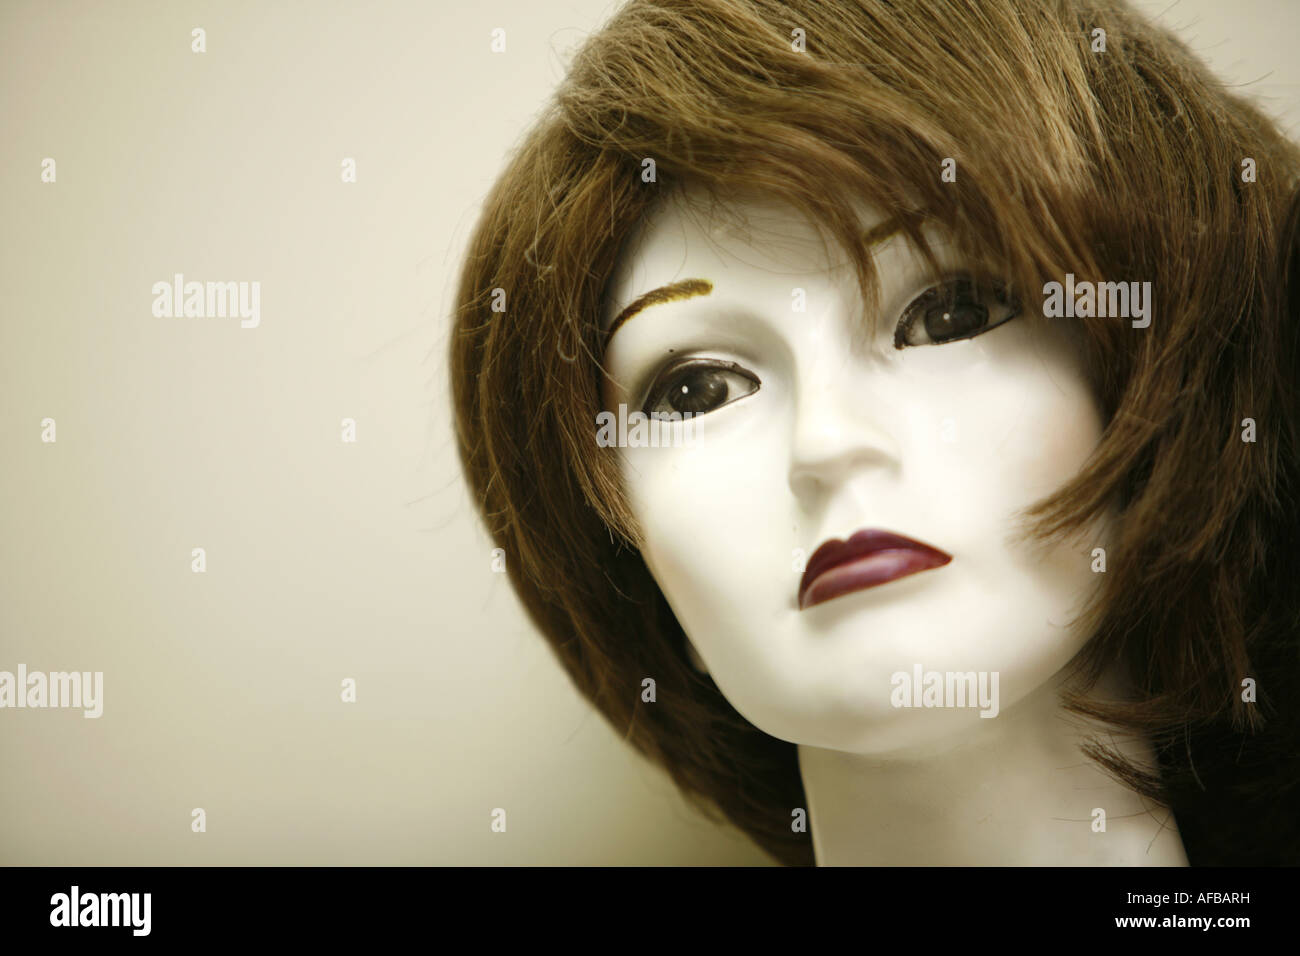 Mane Concept 18 Female Life Size Mannequin Head for Wigs, Hats, Jewelry  Display